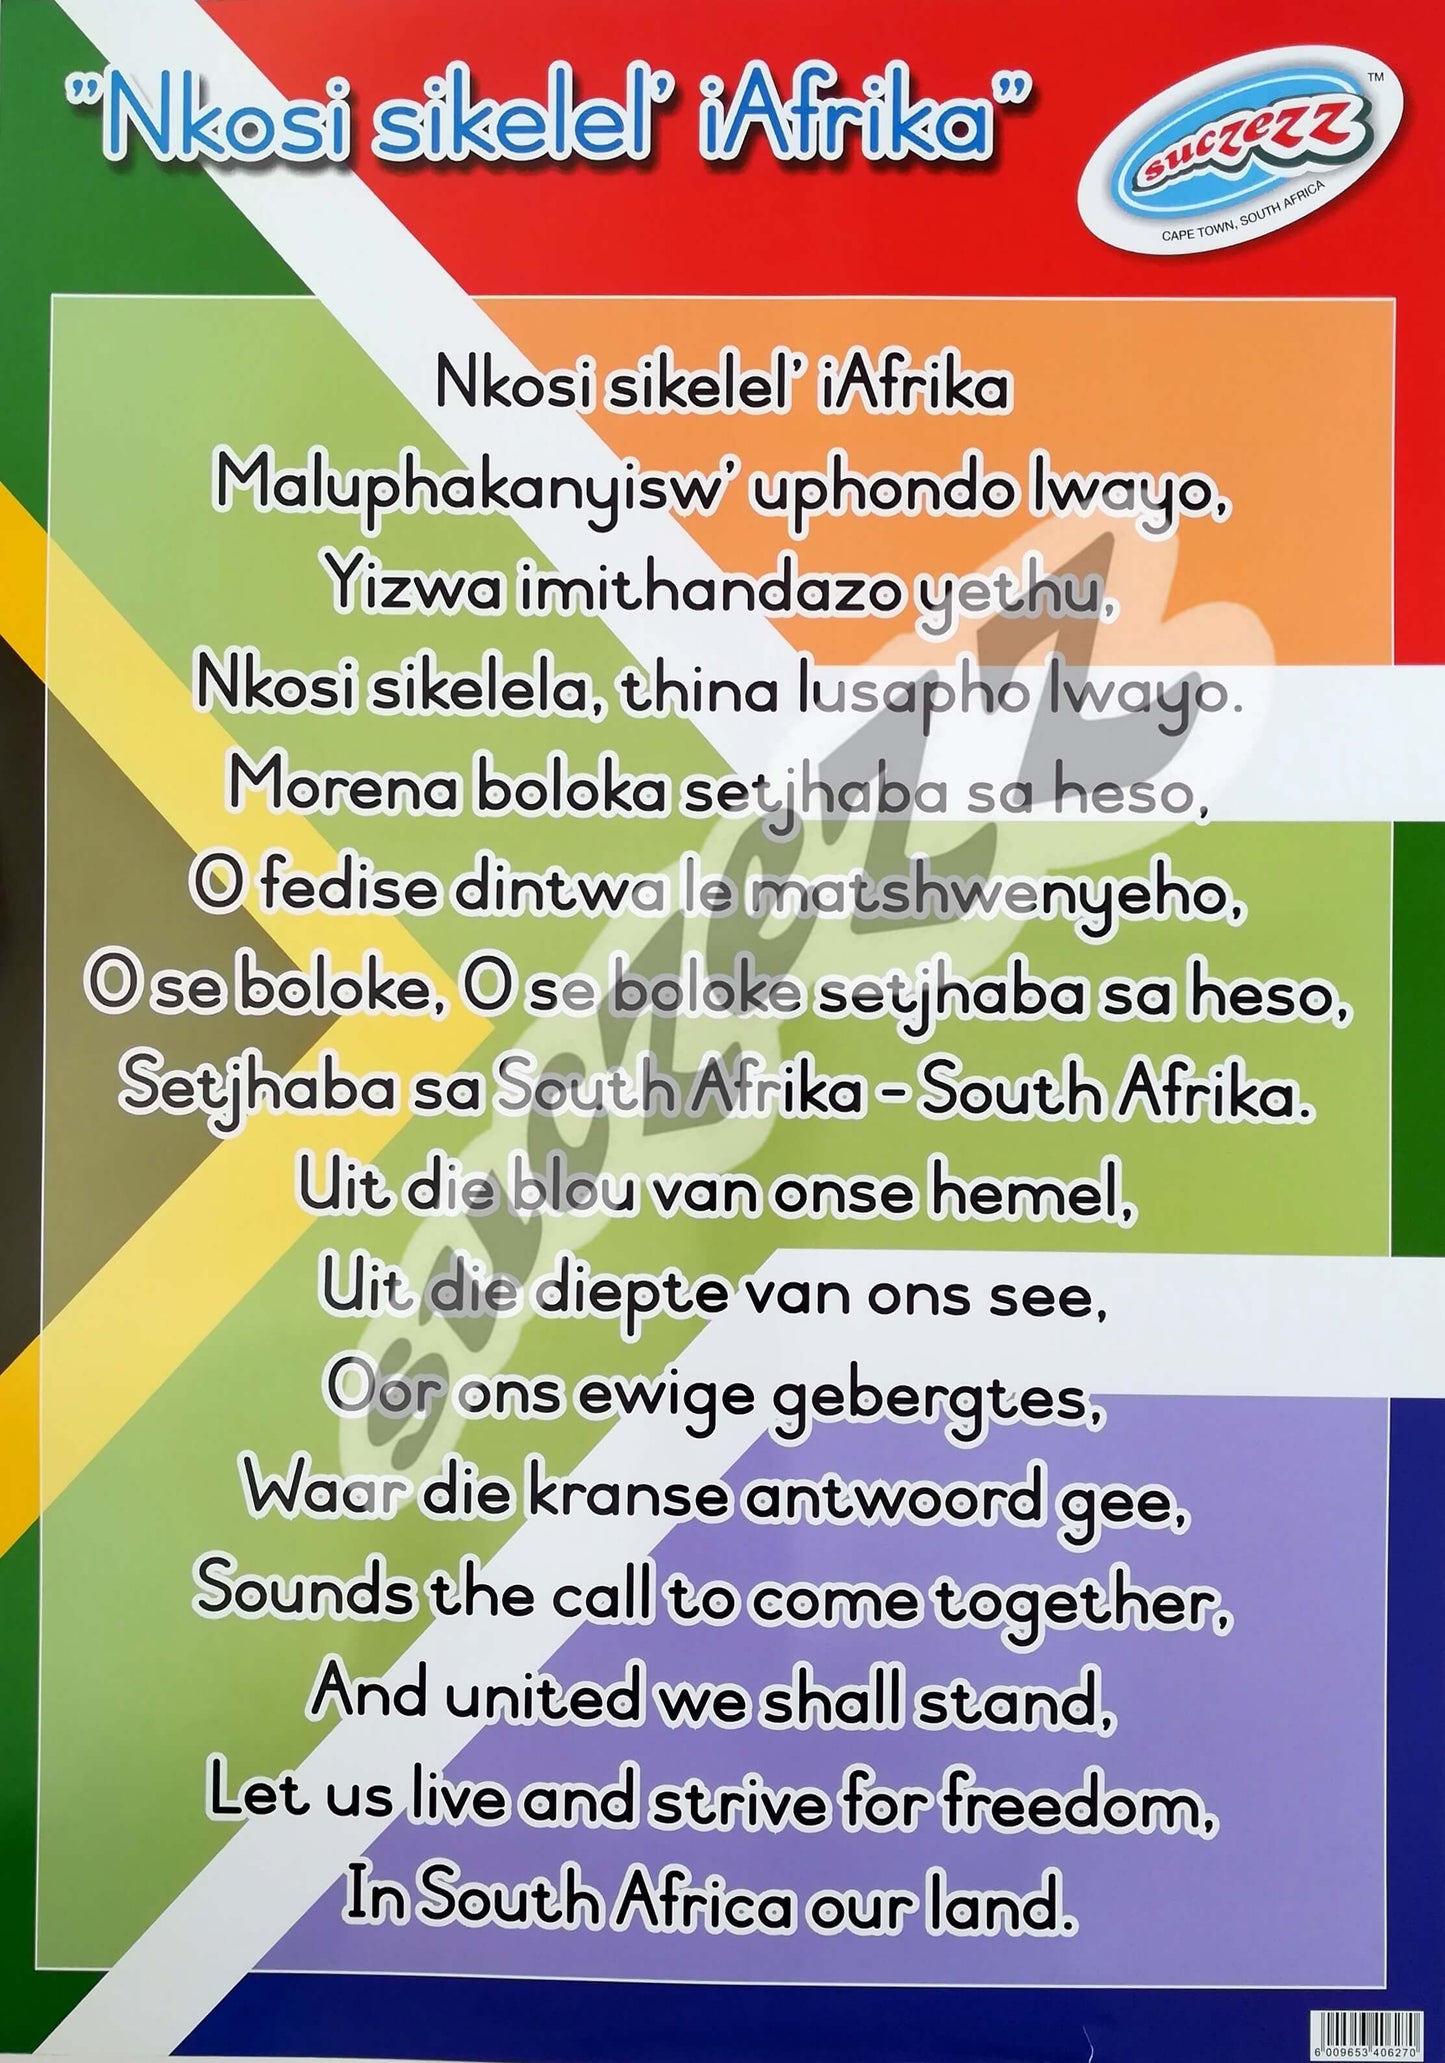 Poster - Nkosi sikelel' Africa Edunation South Africa